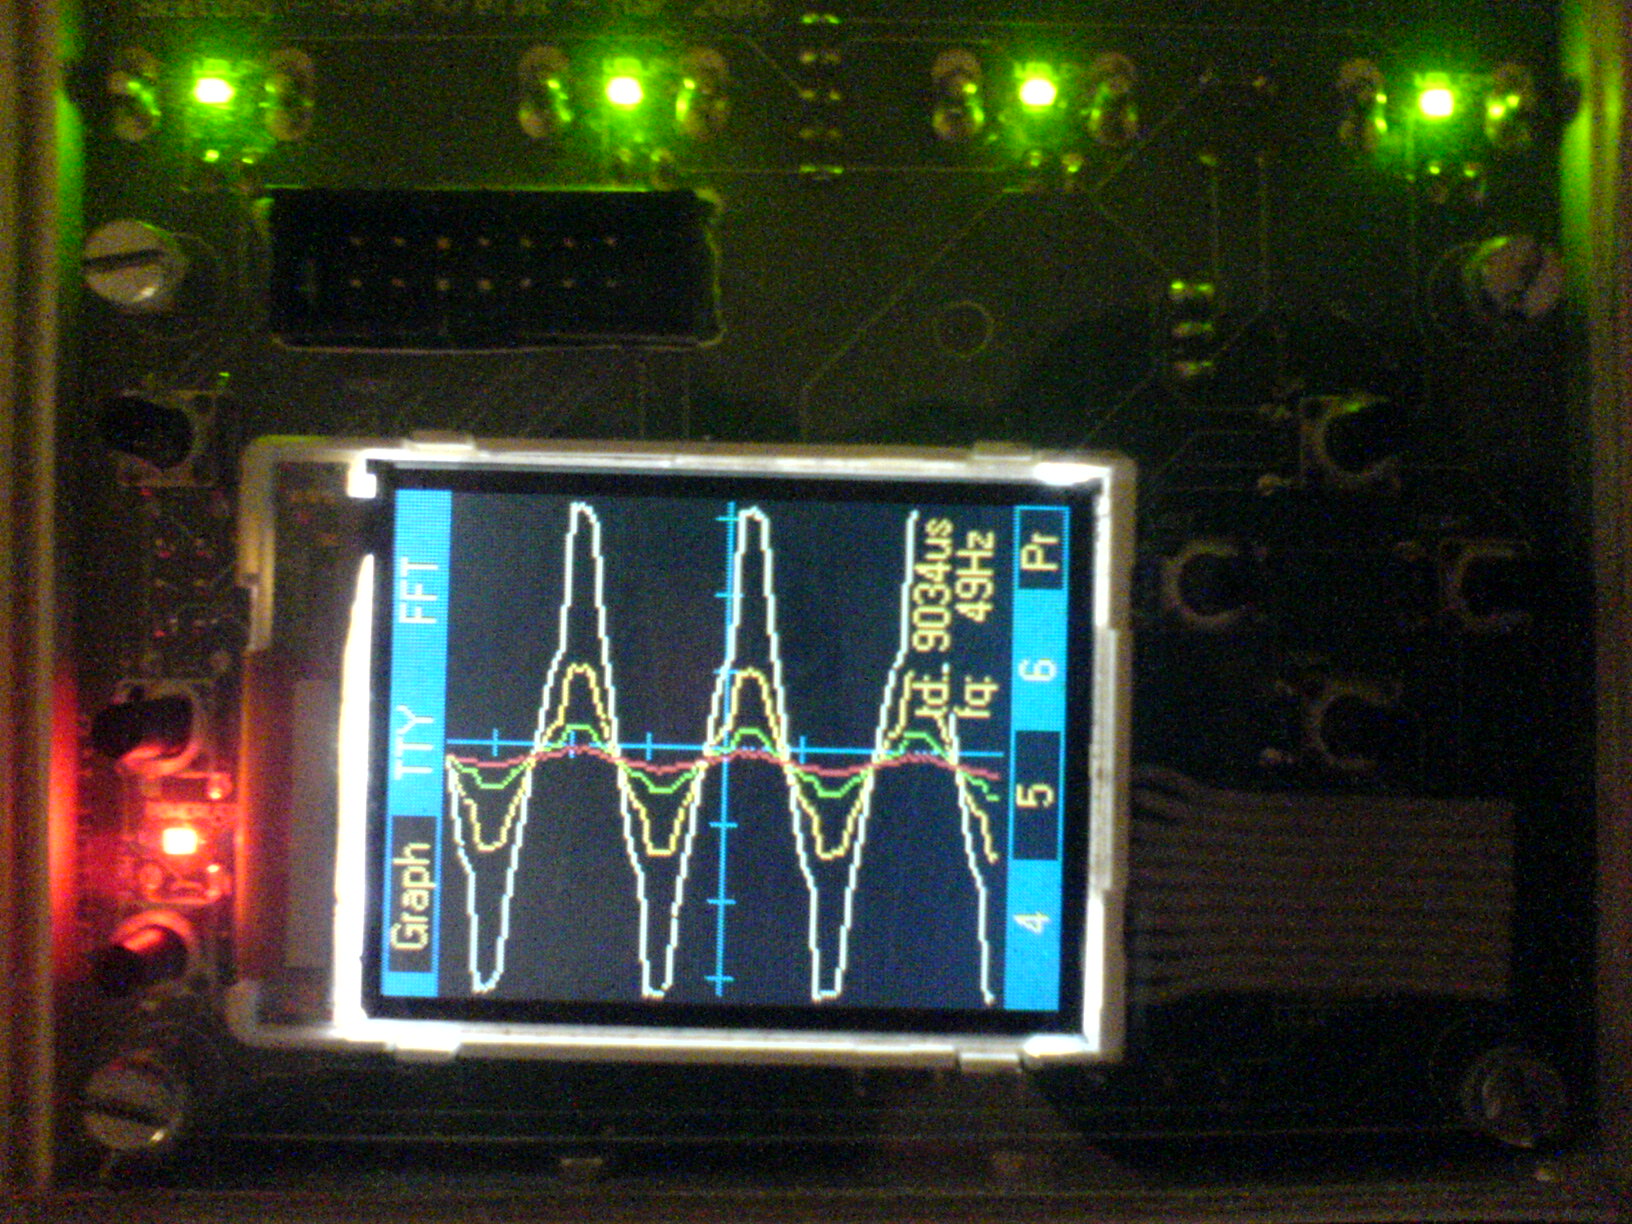 Two channels on oscilloscope